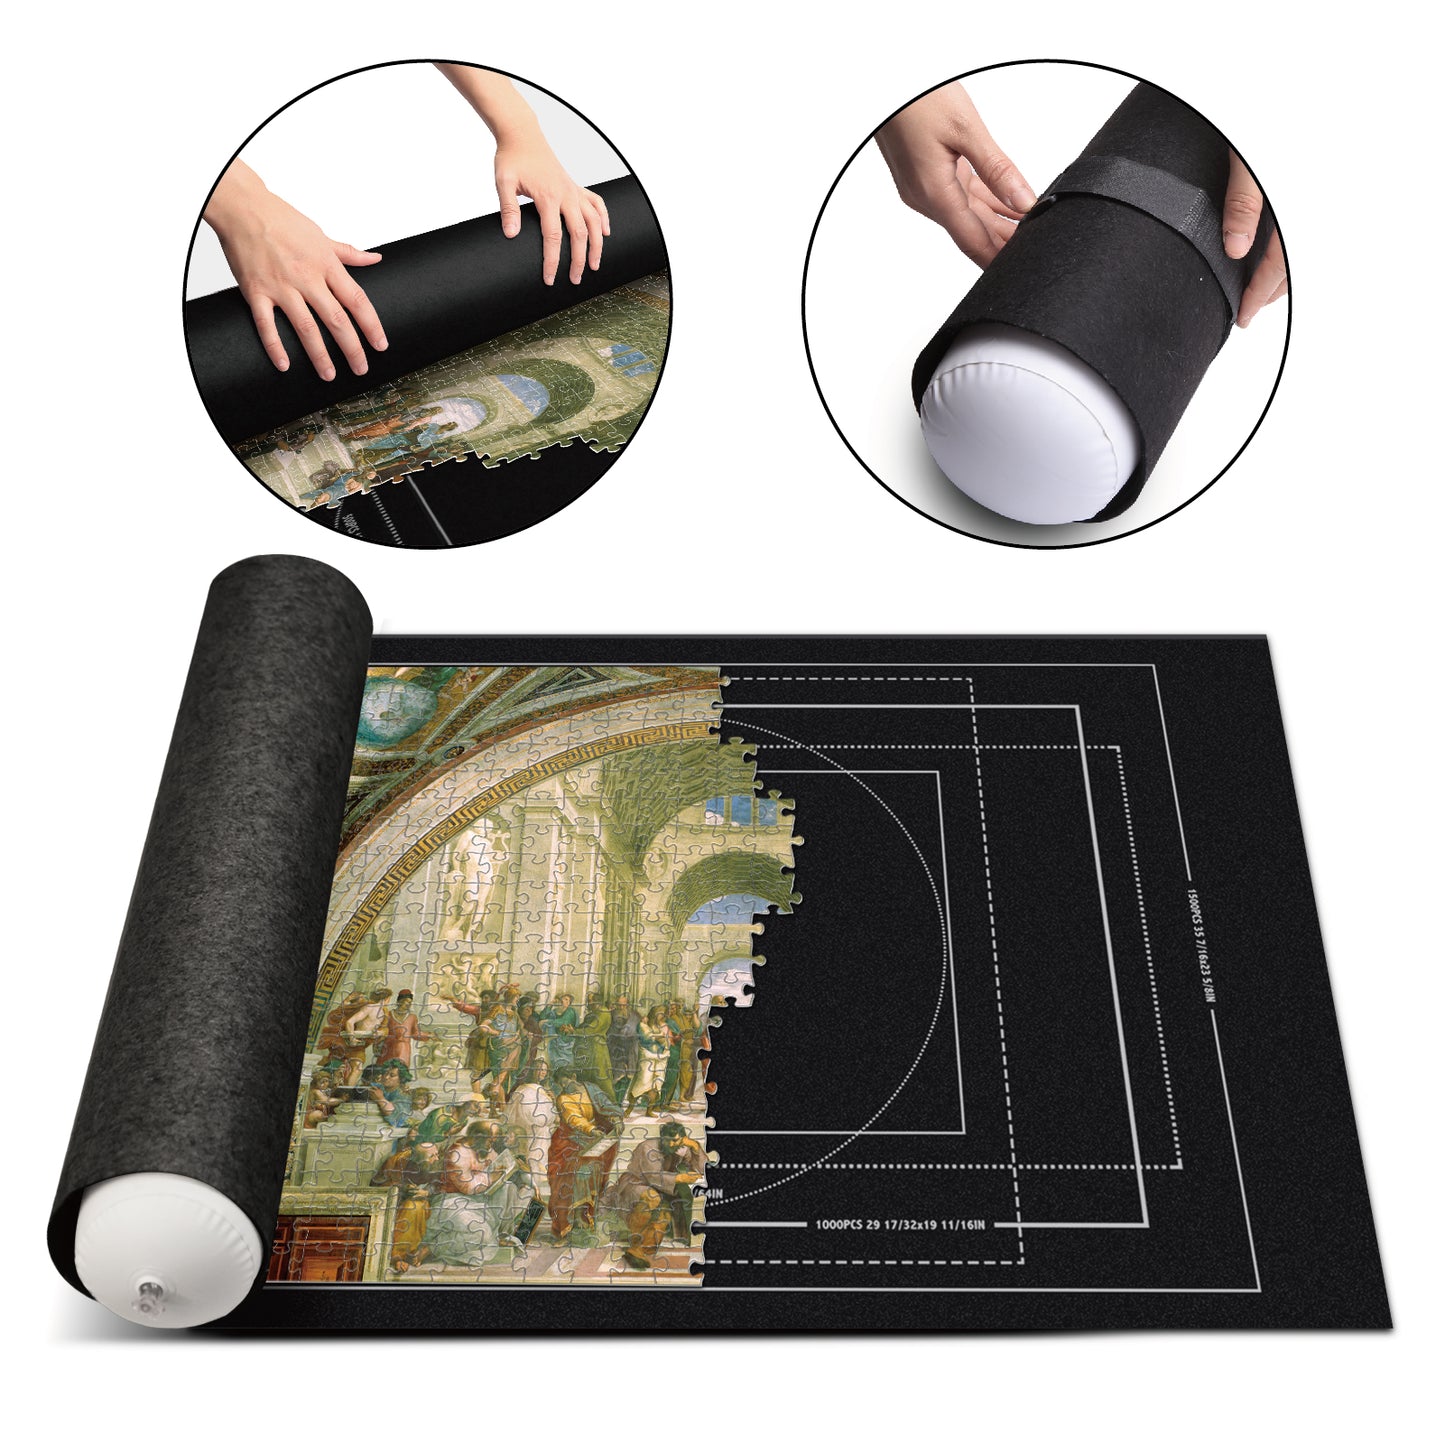 Puzzle Roll-It-Up Mat - Fits up to 1500-piece puzzles 3-piece set